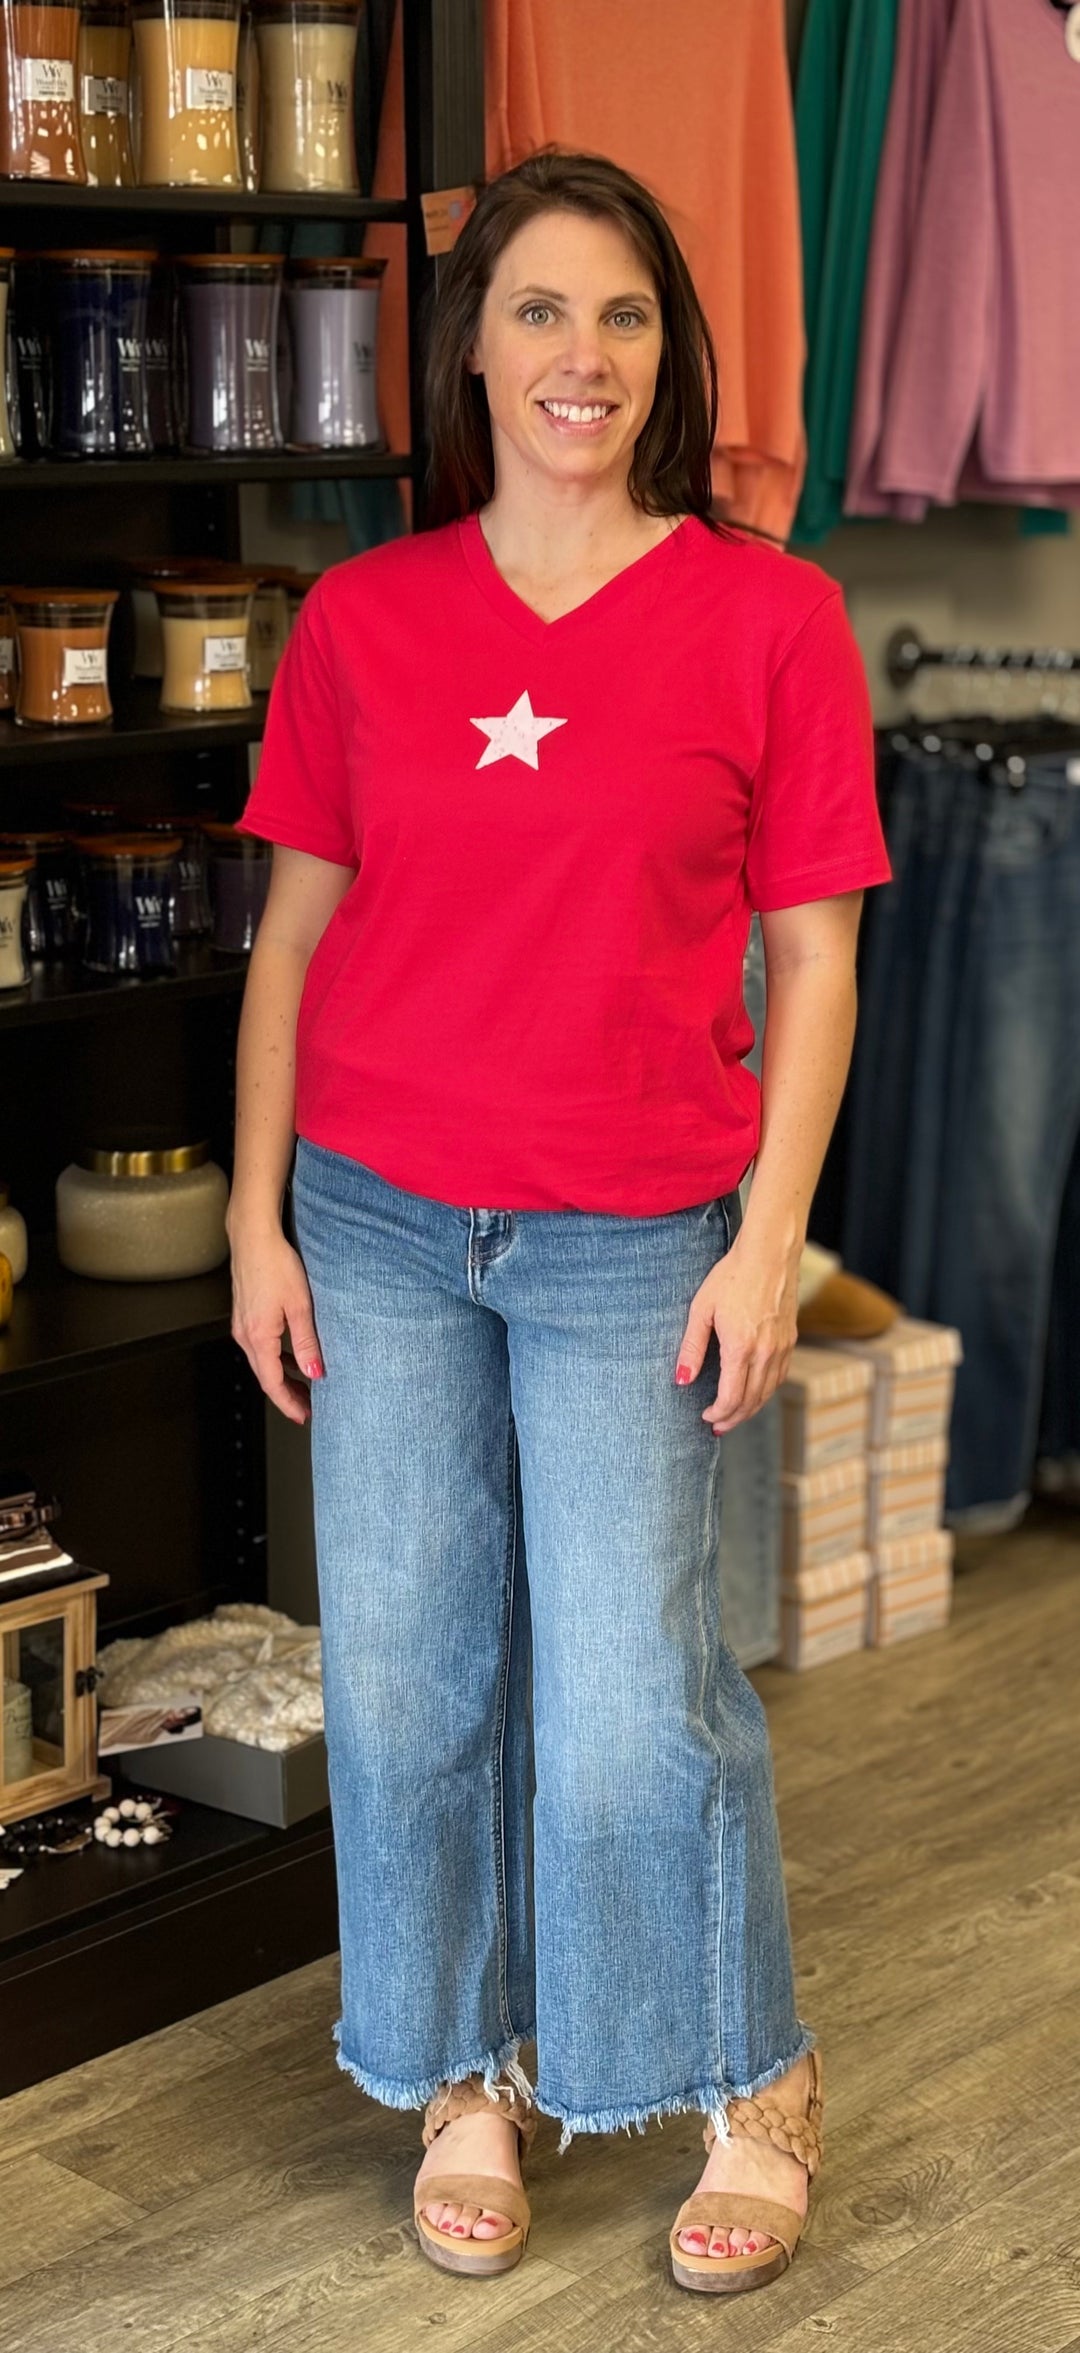 Star 4th of July Graphic Tee-Graphic Tees-Never Lose Hope Designs-Evergreen Boutique, Women’s Fashion Boutique in Santa Claus, Indiana